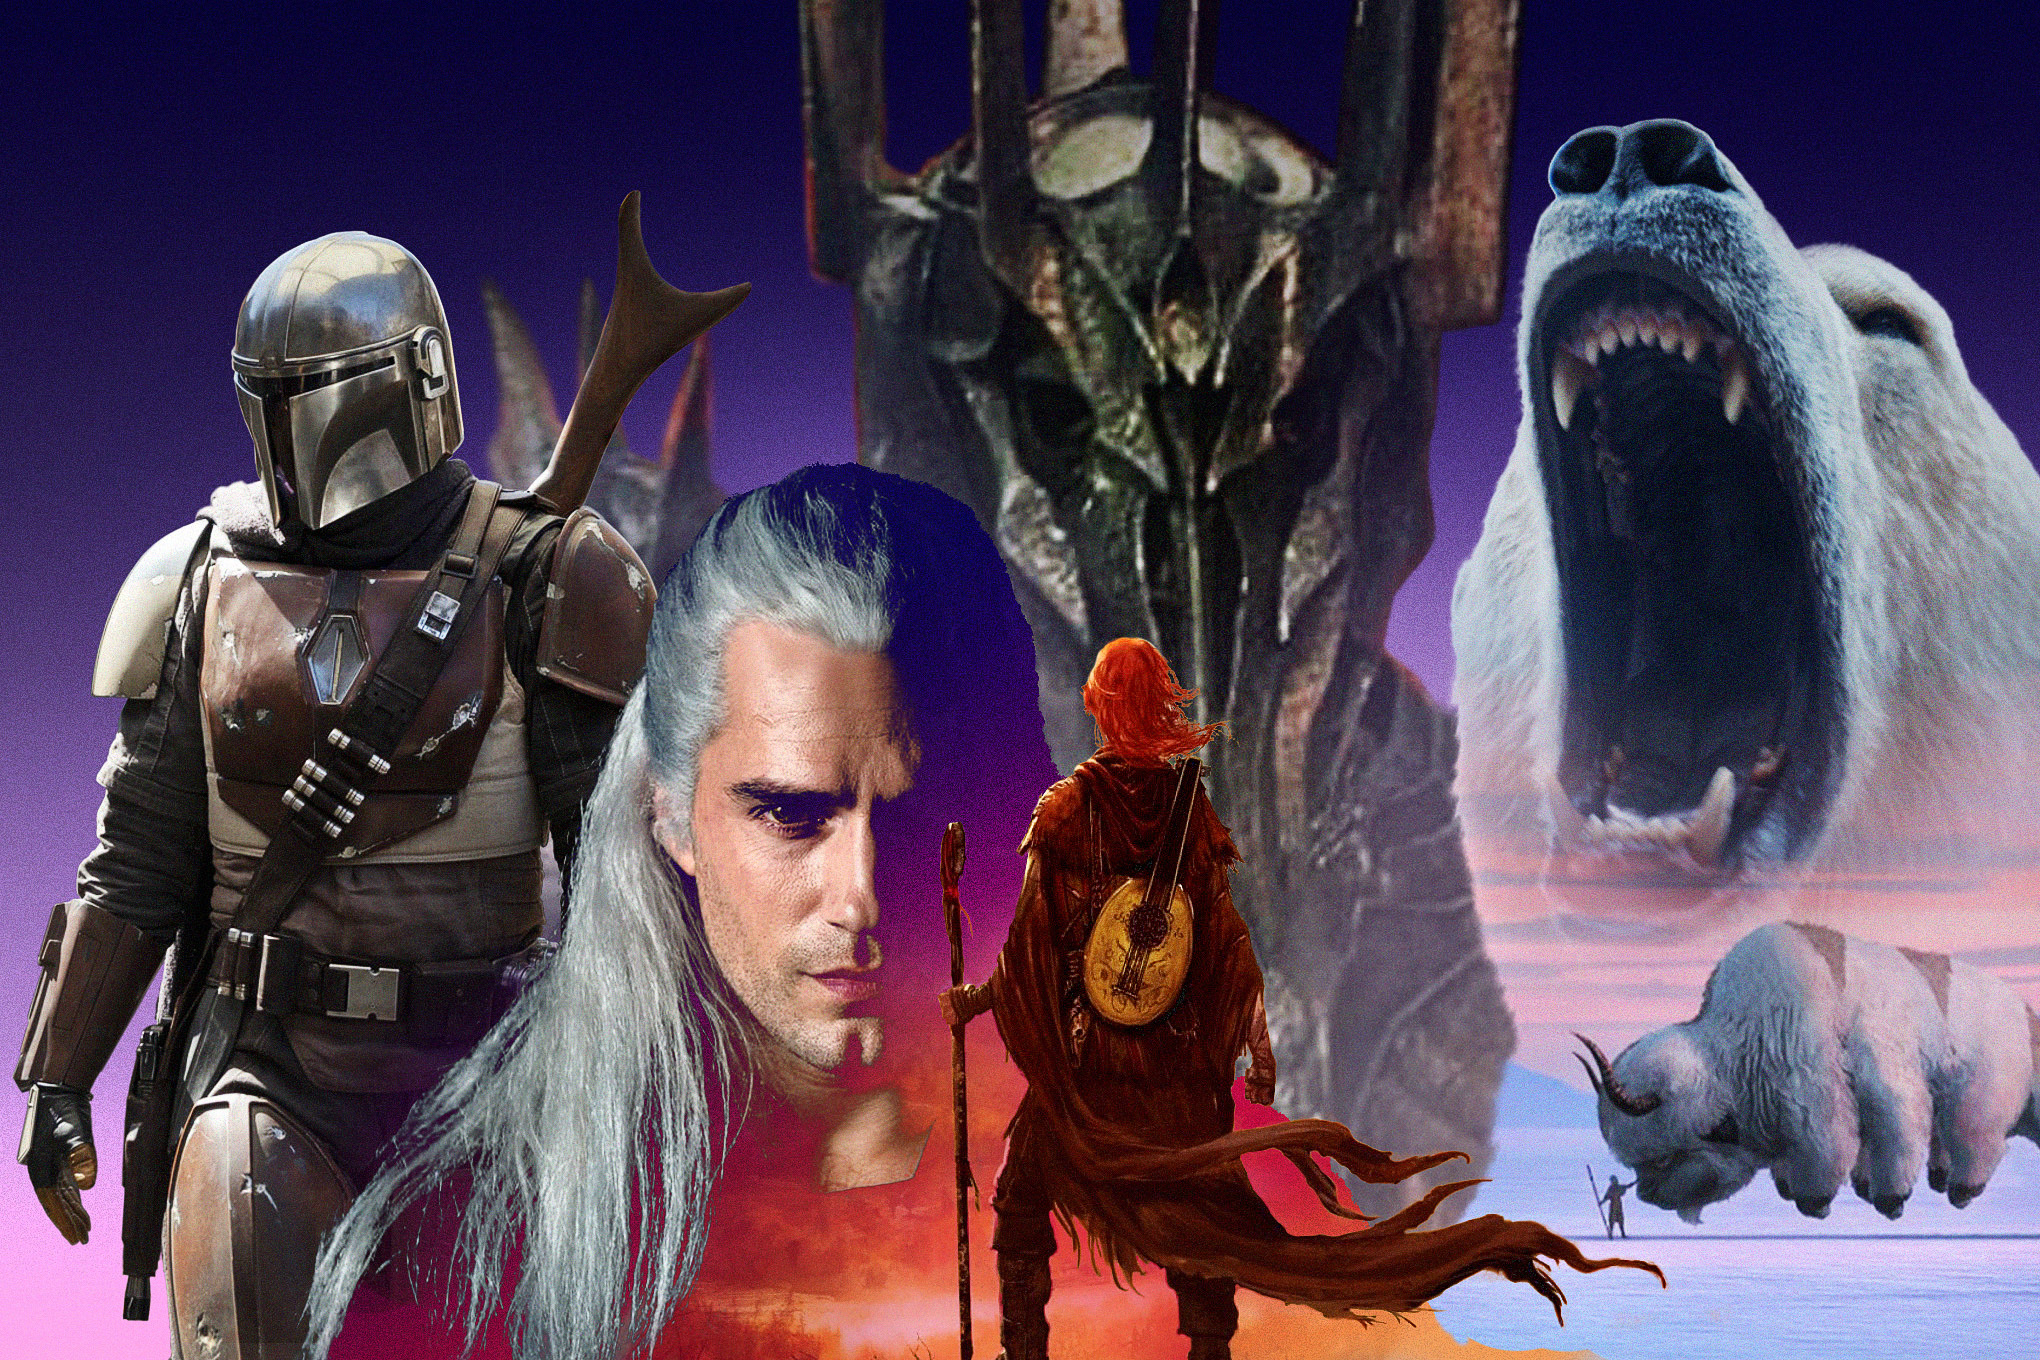 a collage of characters from TV shows such as The Mandalorian, The Witcher, and His Dark Materials